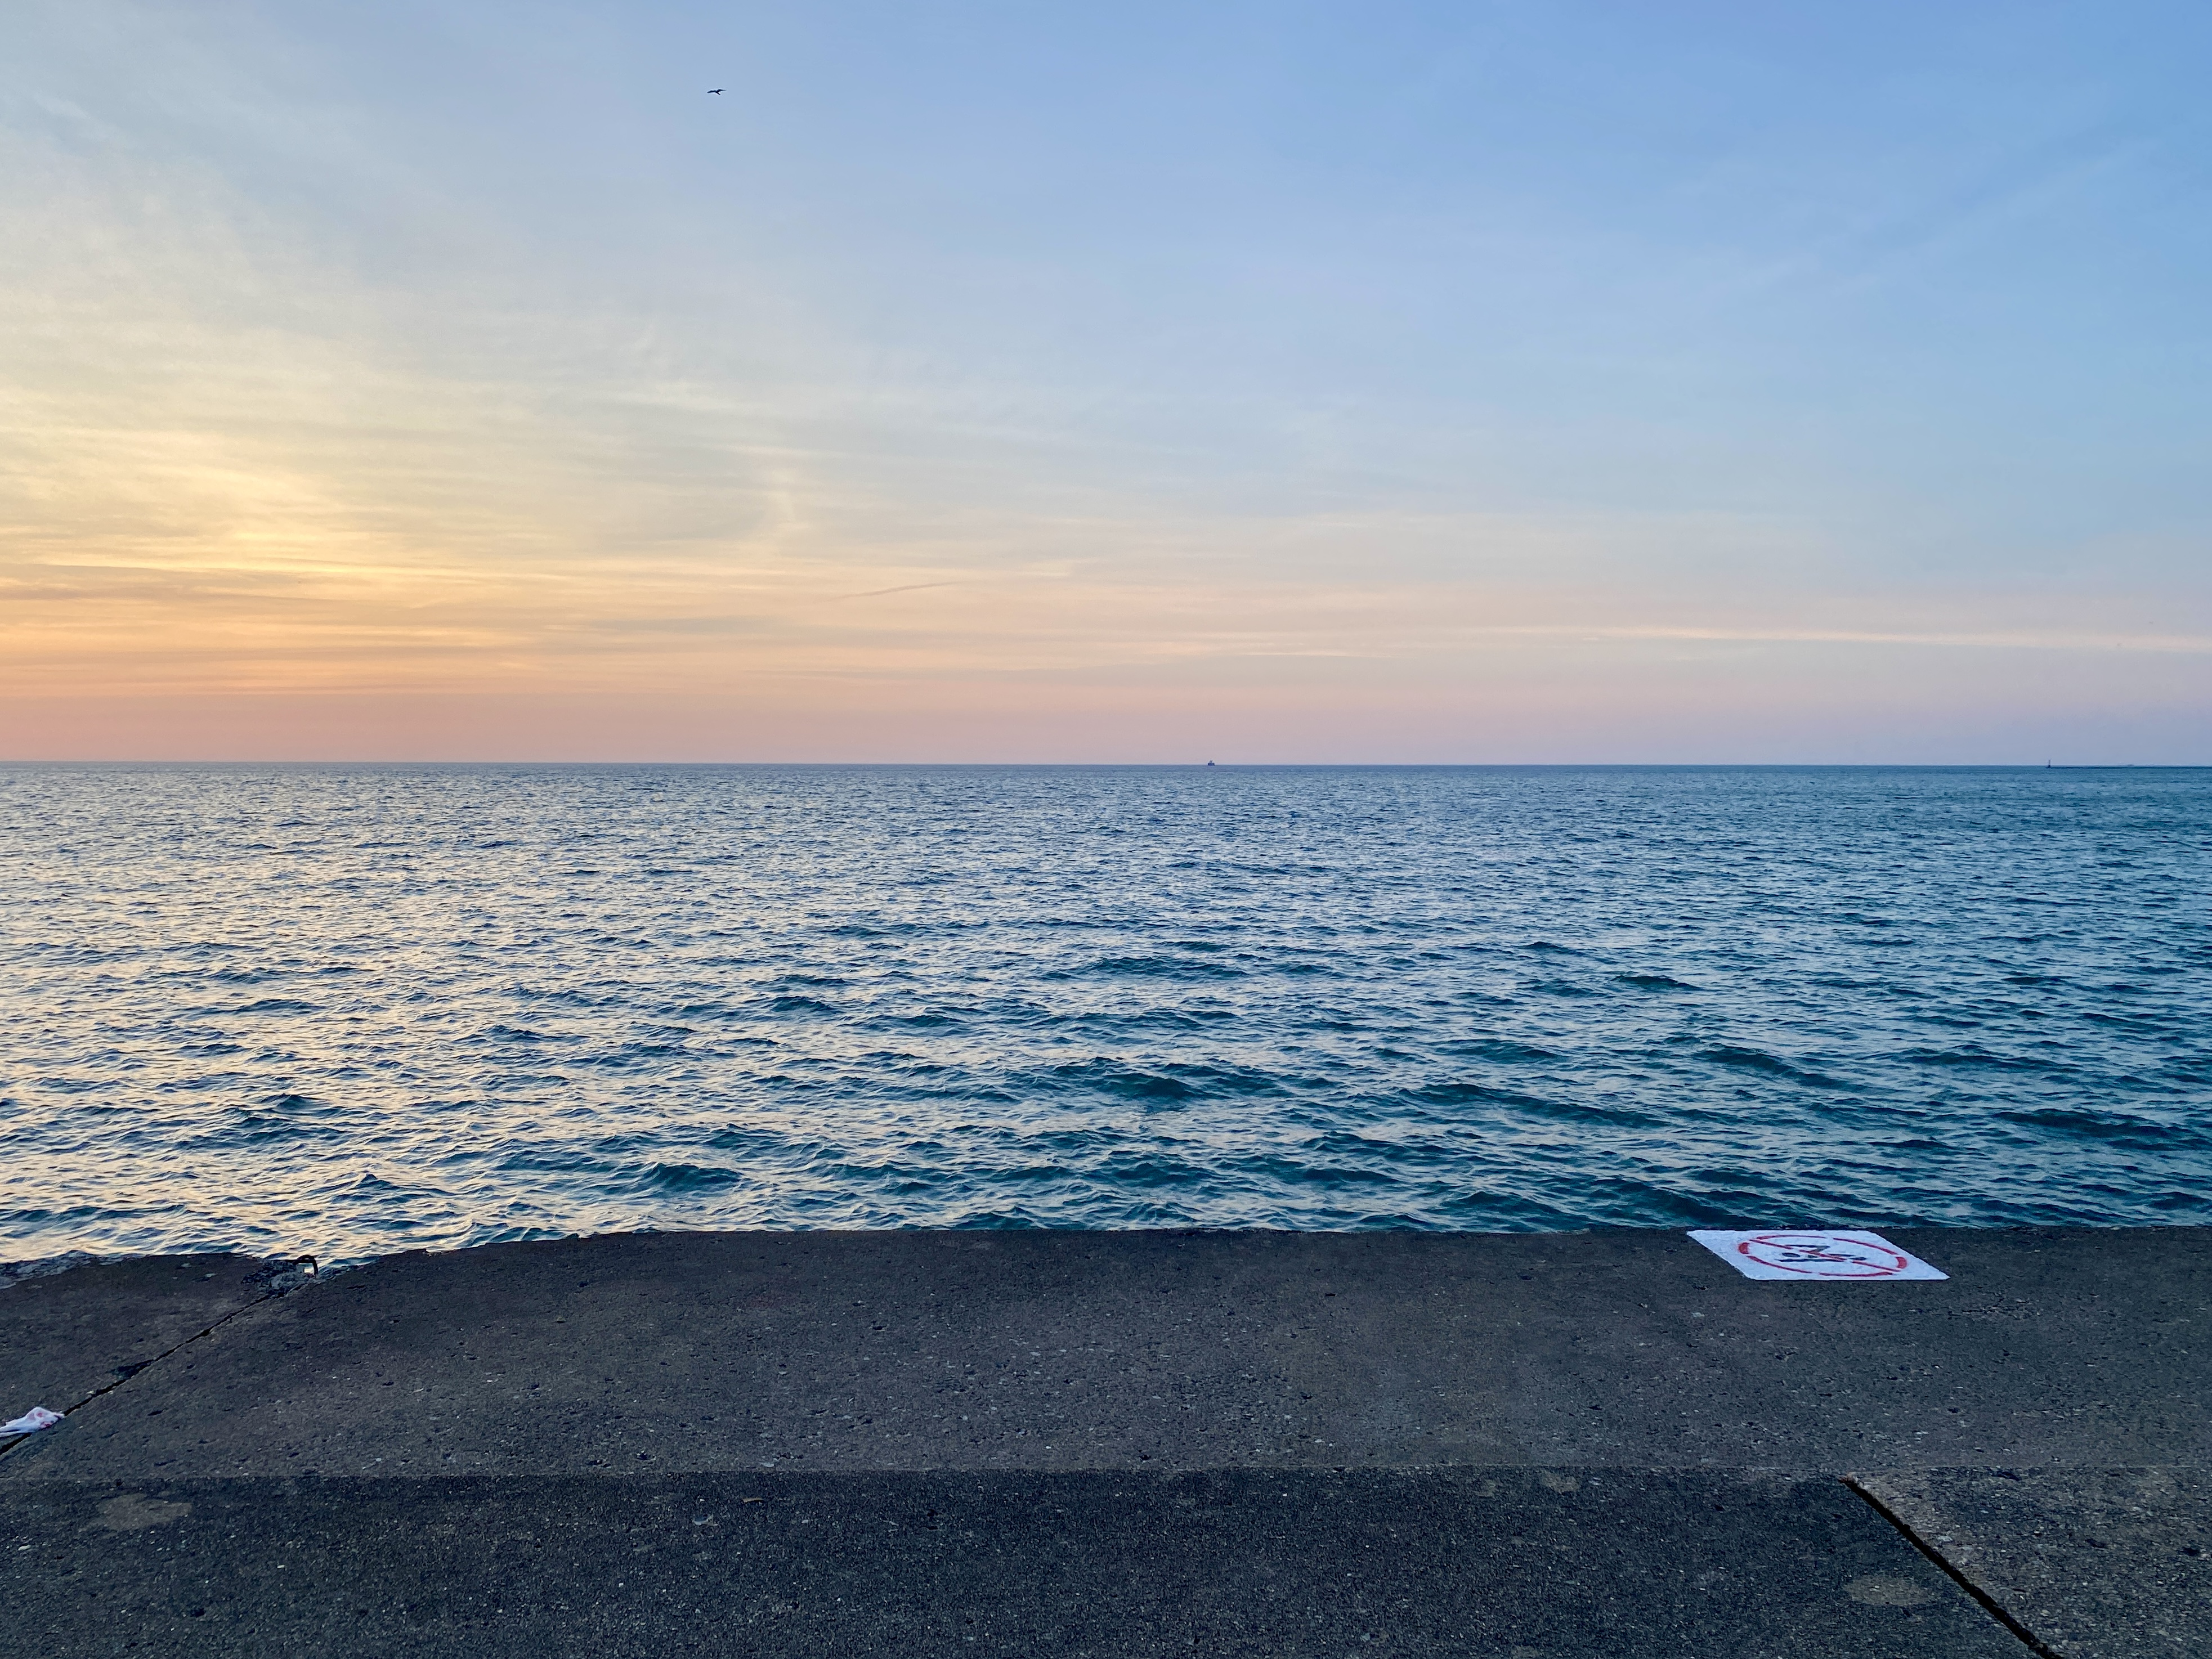 Horizon of a large blue lake just after sunrise, yellow and pink to the left, with small waves and a strip of concrete in the foreground